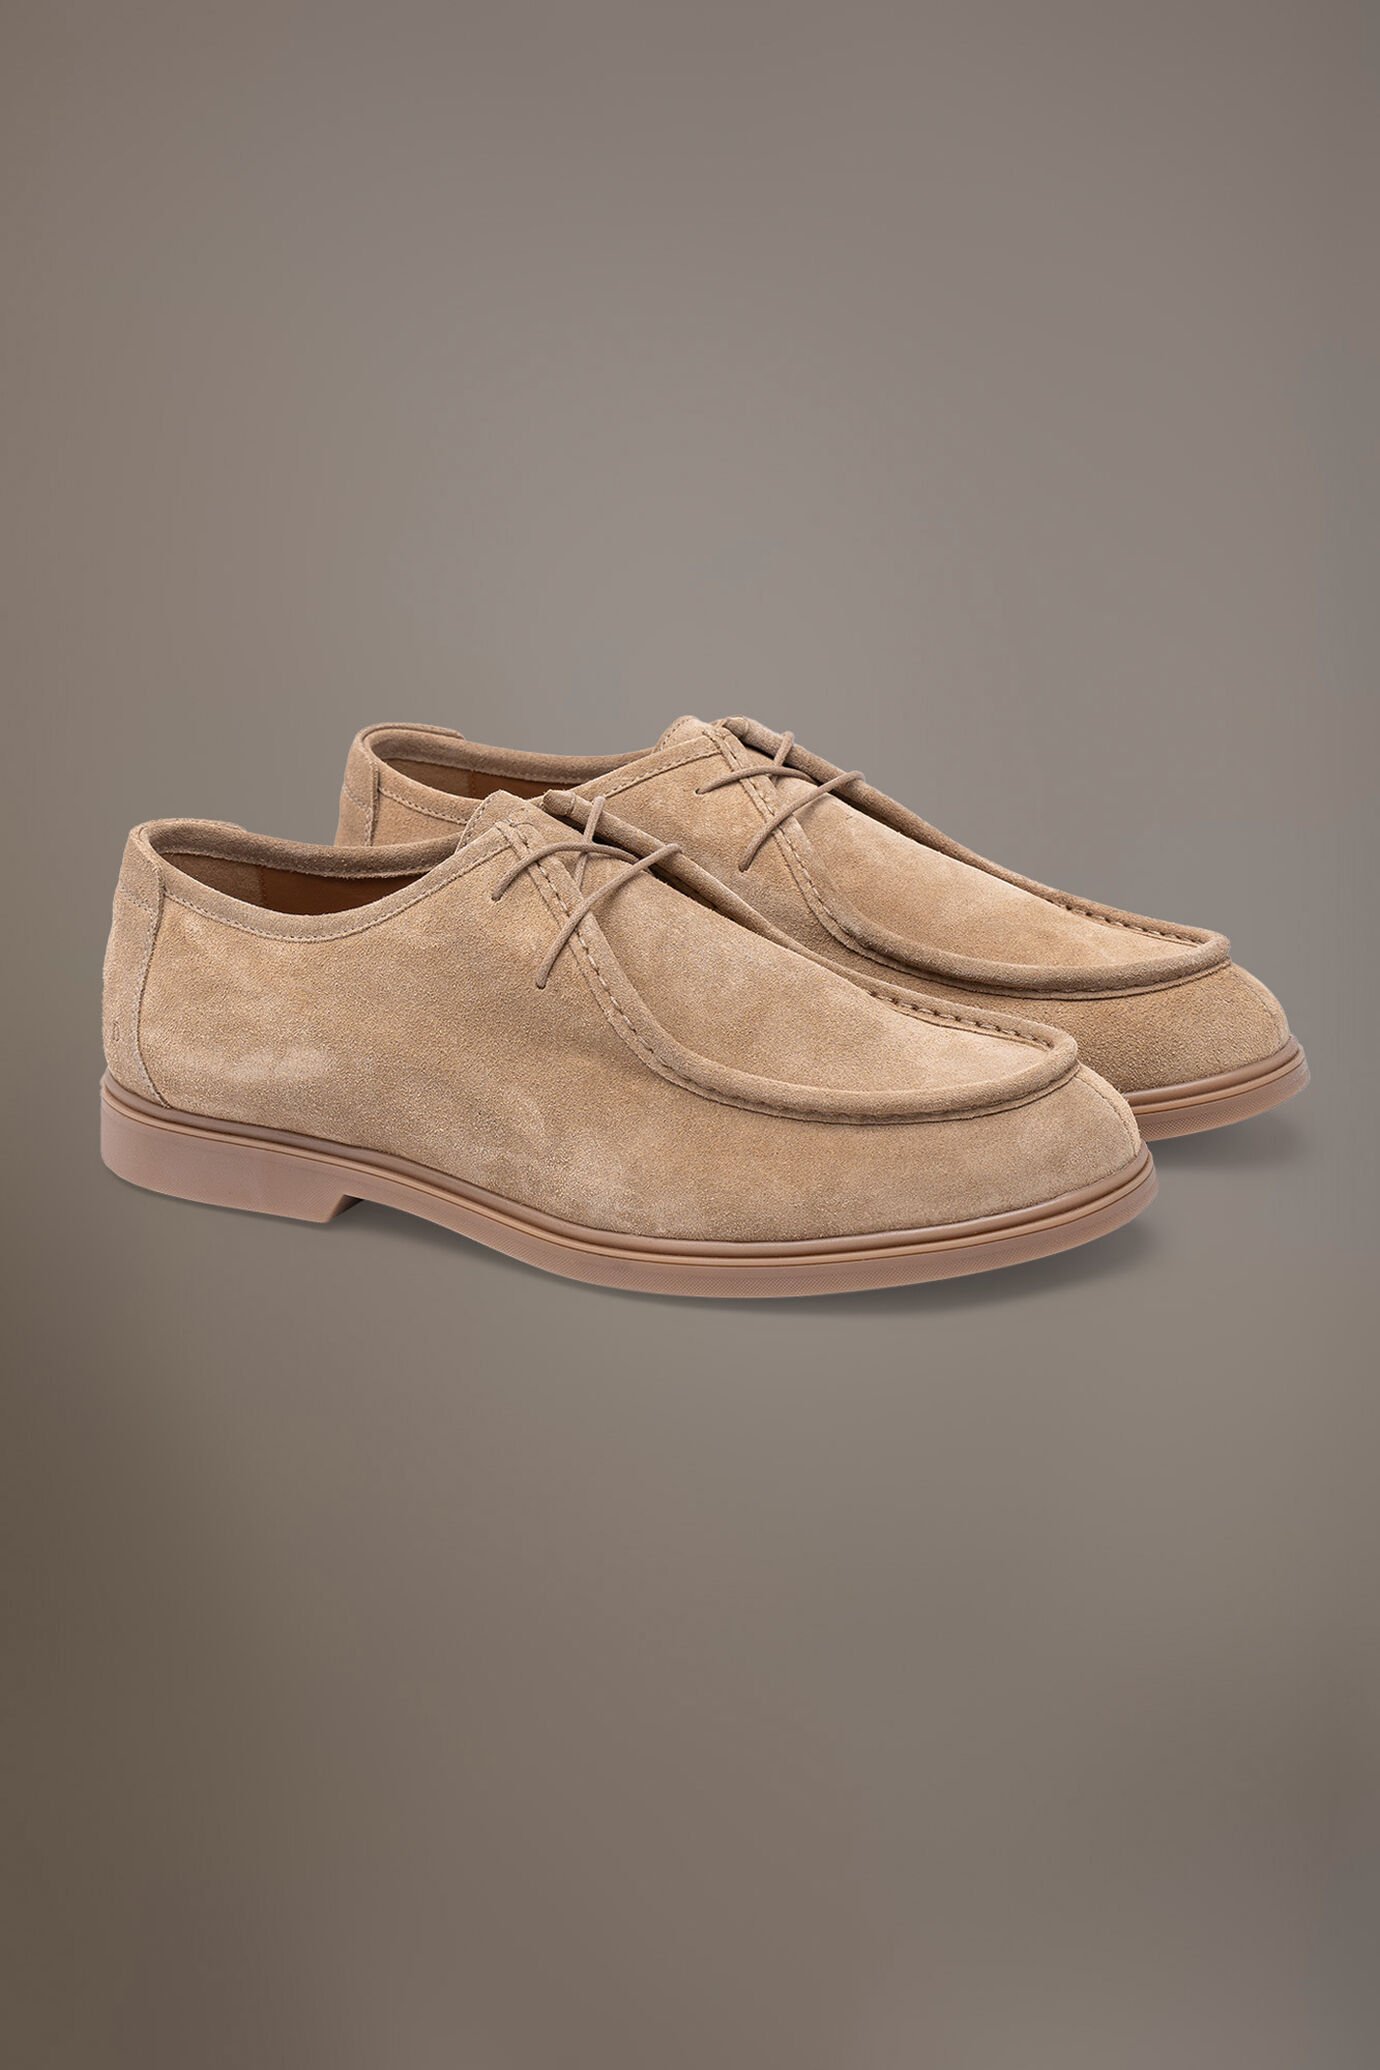 Suede ranger shoes 100% leather with rubber sole